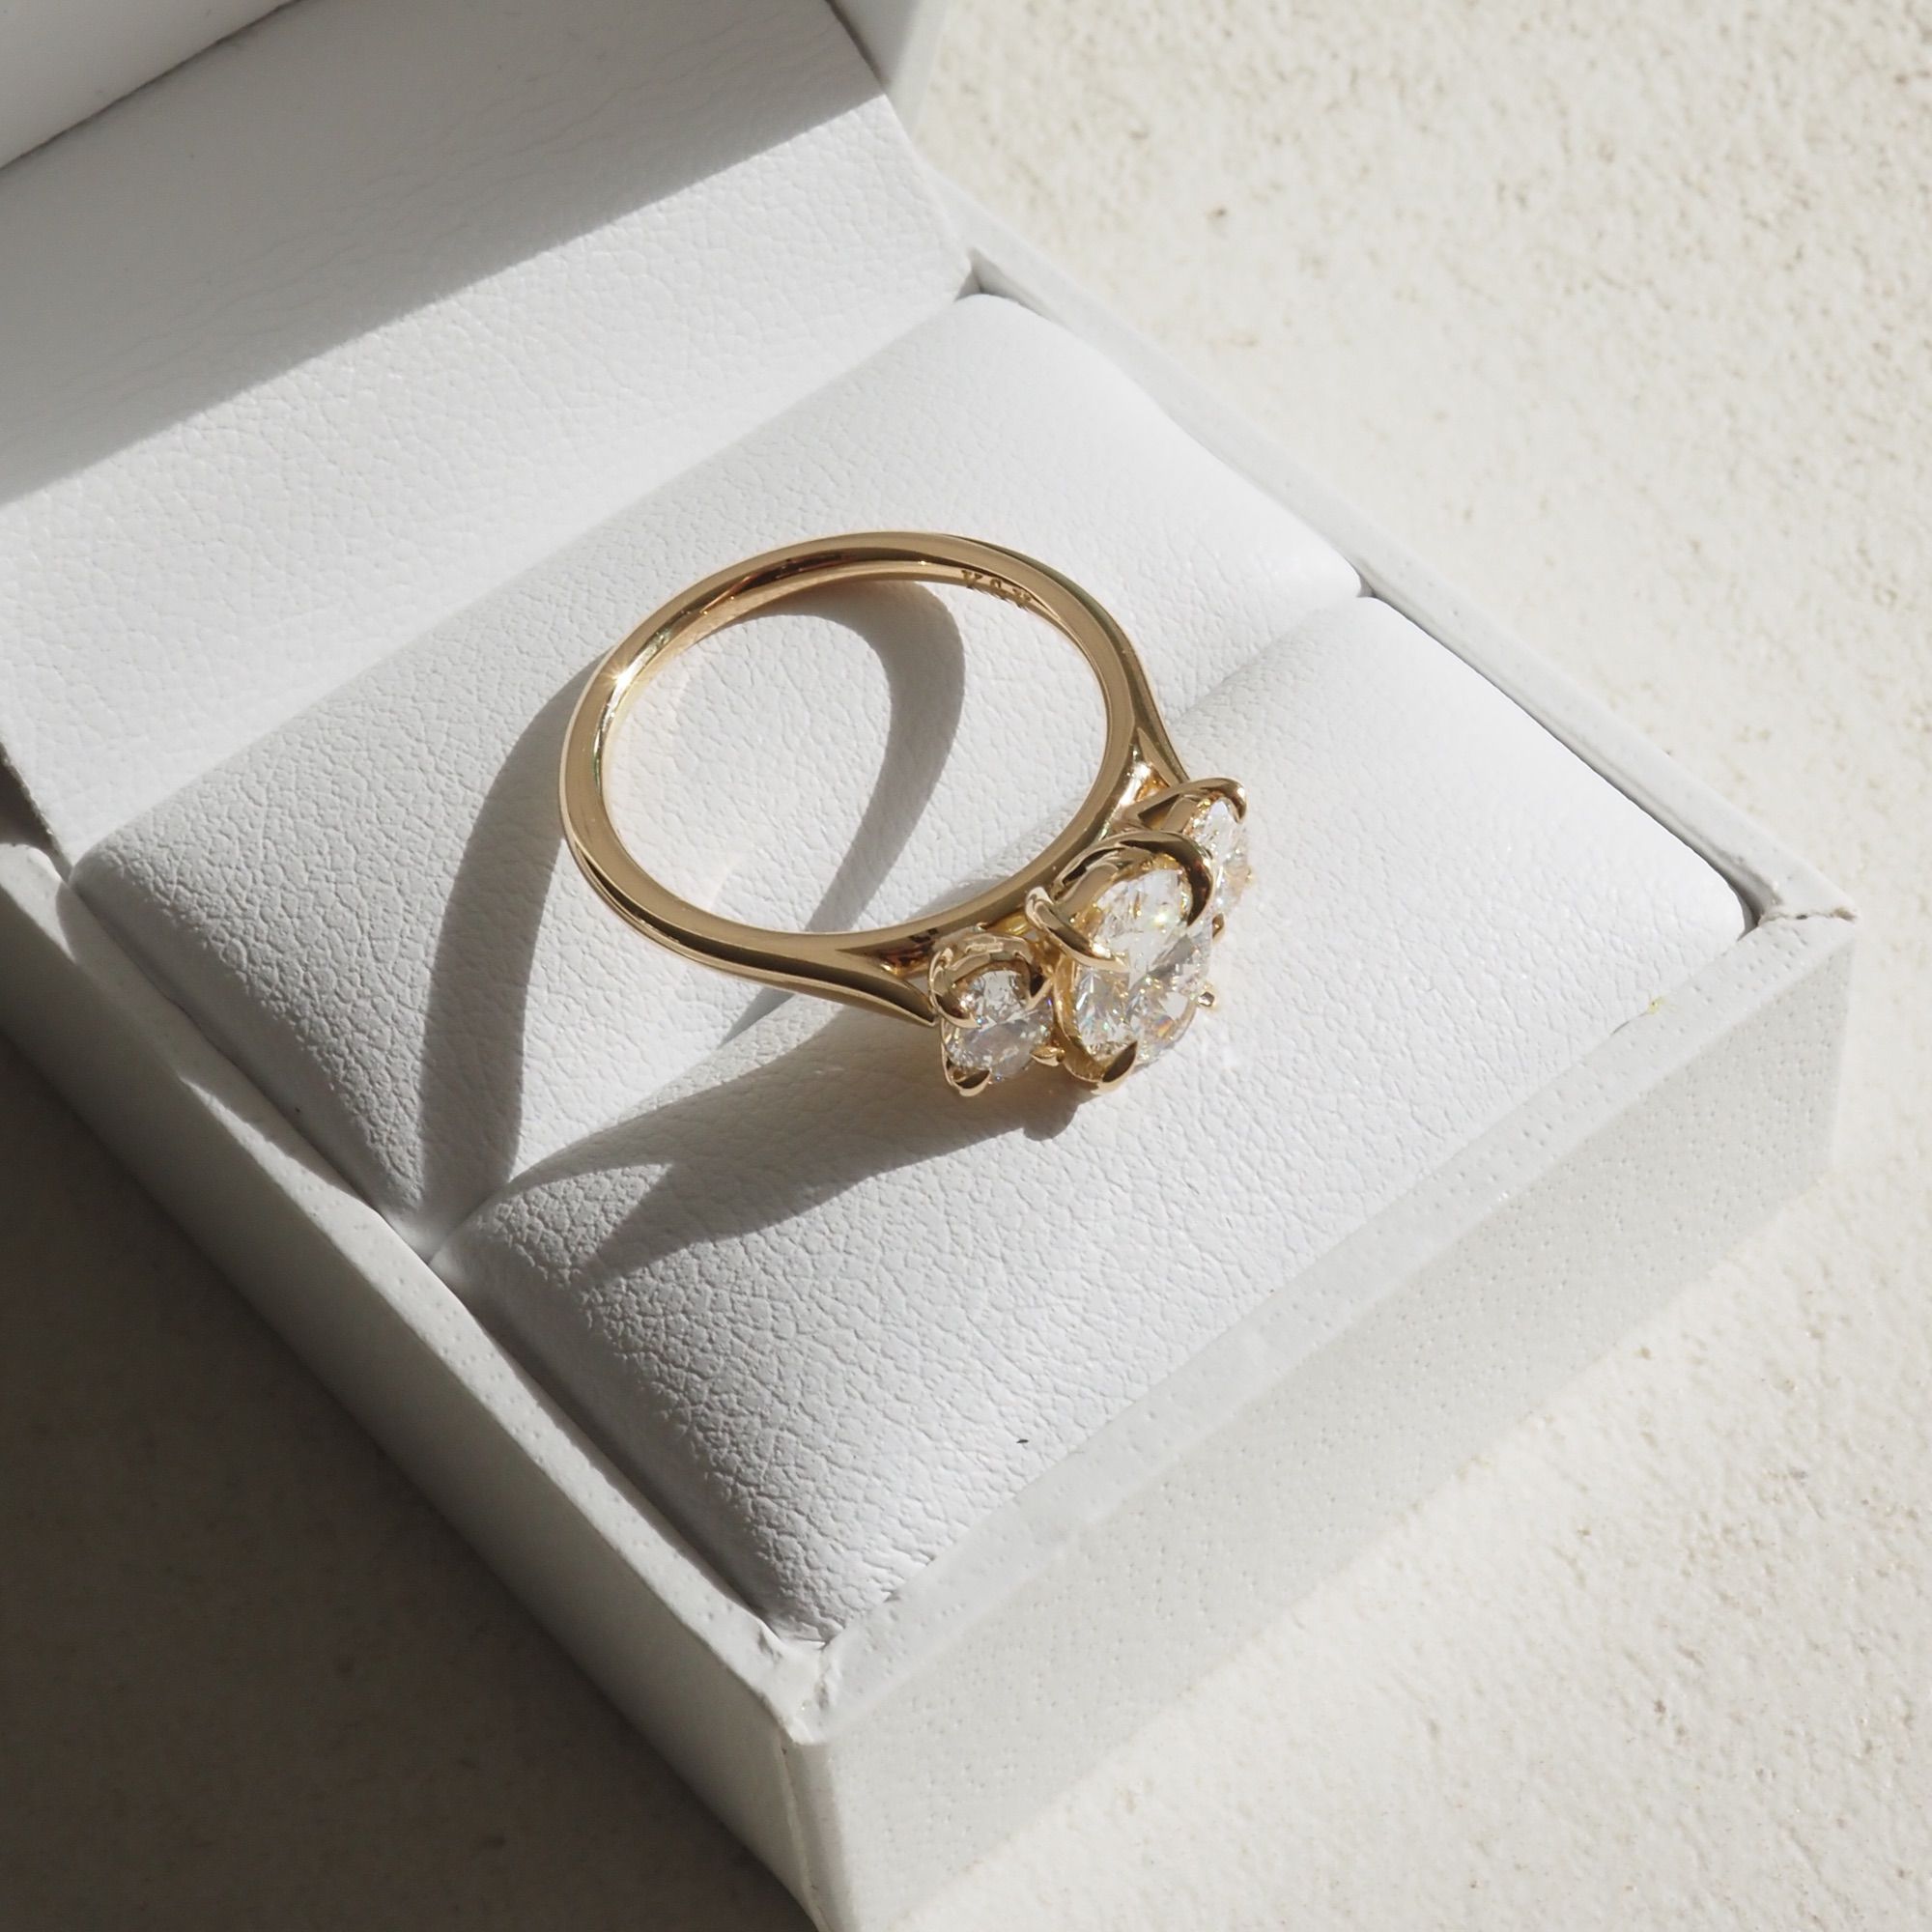 Our Ava ring showcases a brilliant oval cut centre stone shining between two smaller-sized shoulder stones. The centre stone size pictured is 1.02ct and the shoulder stones are 0.25ct each.